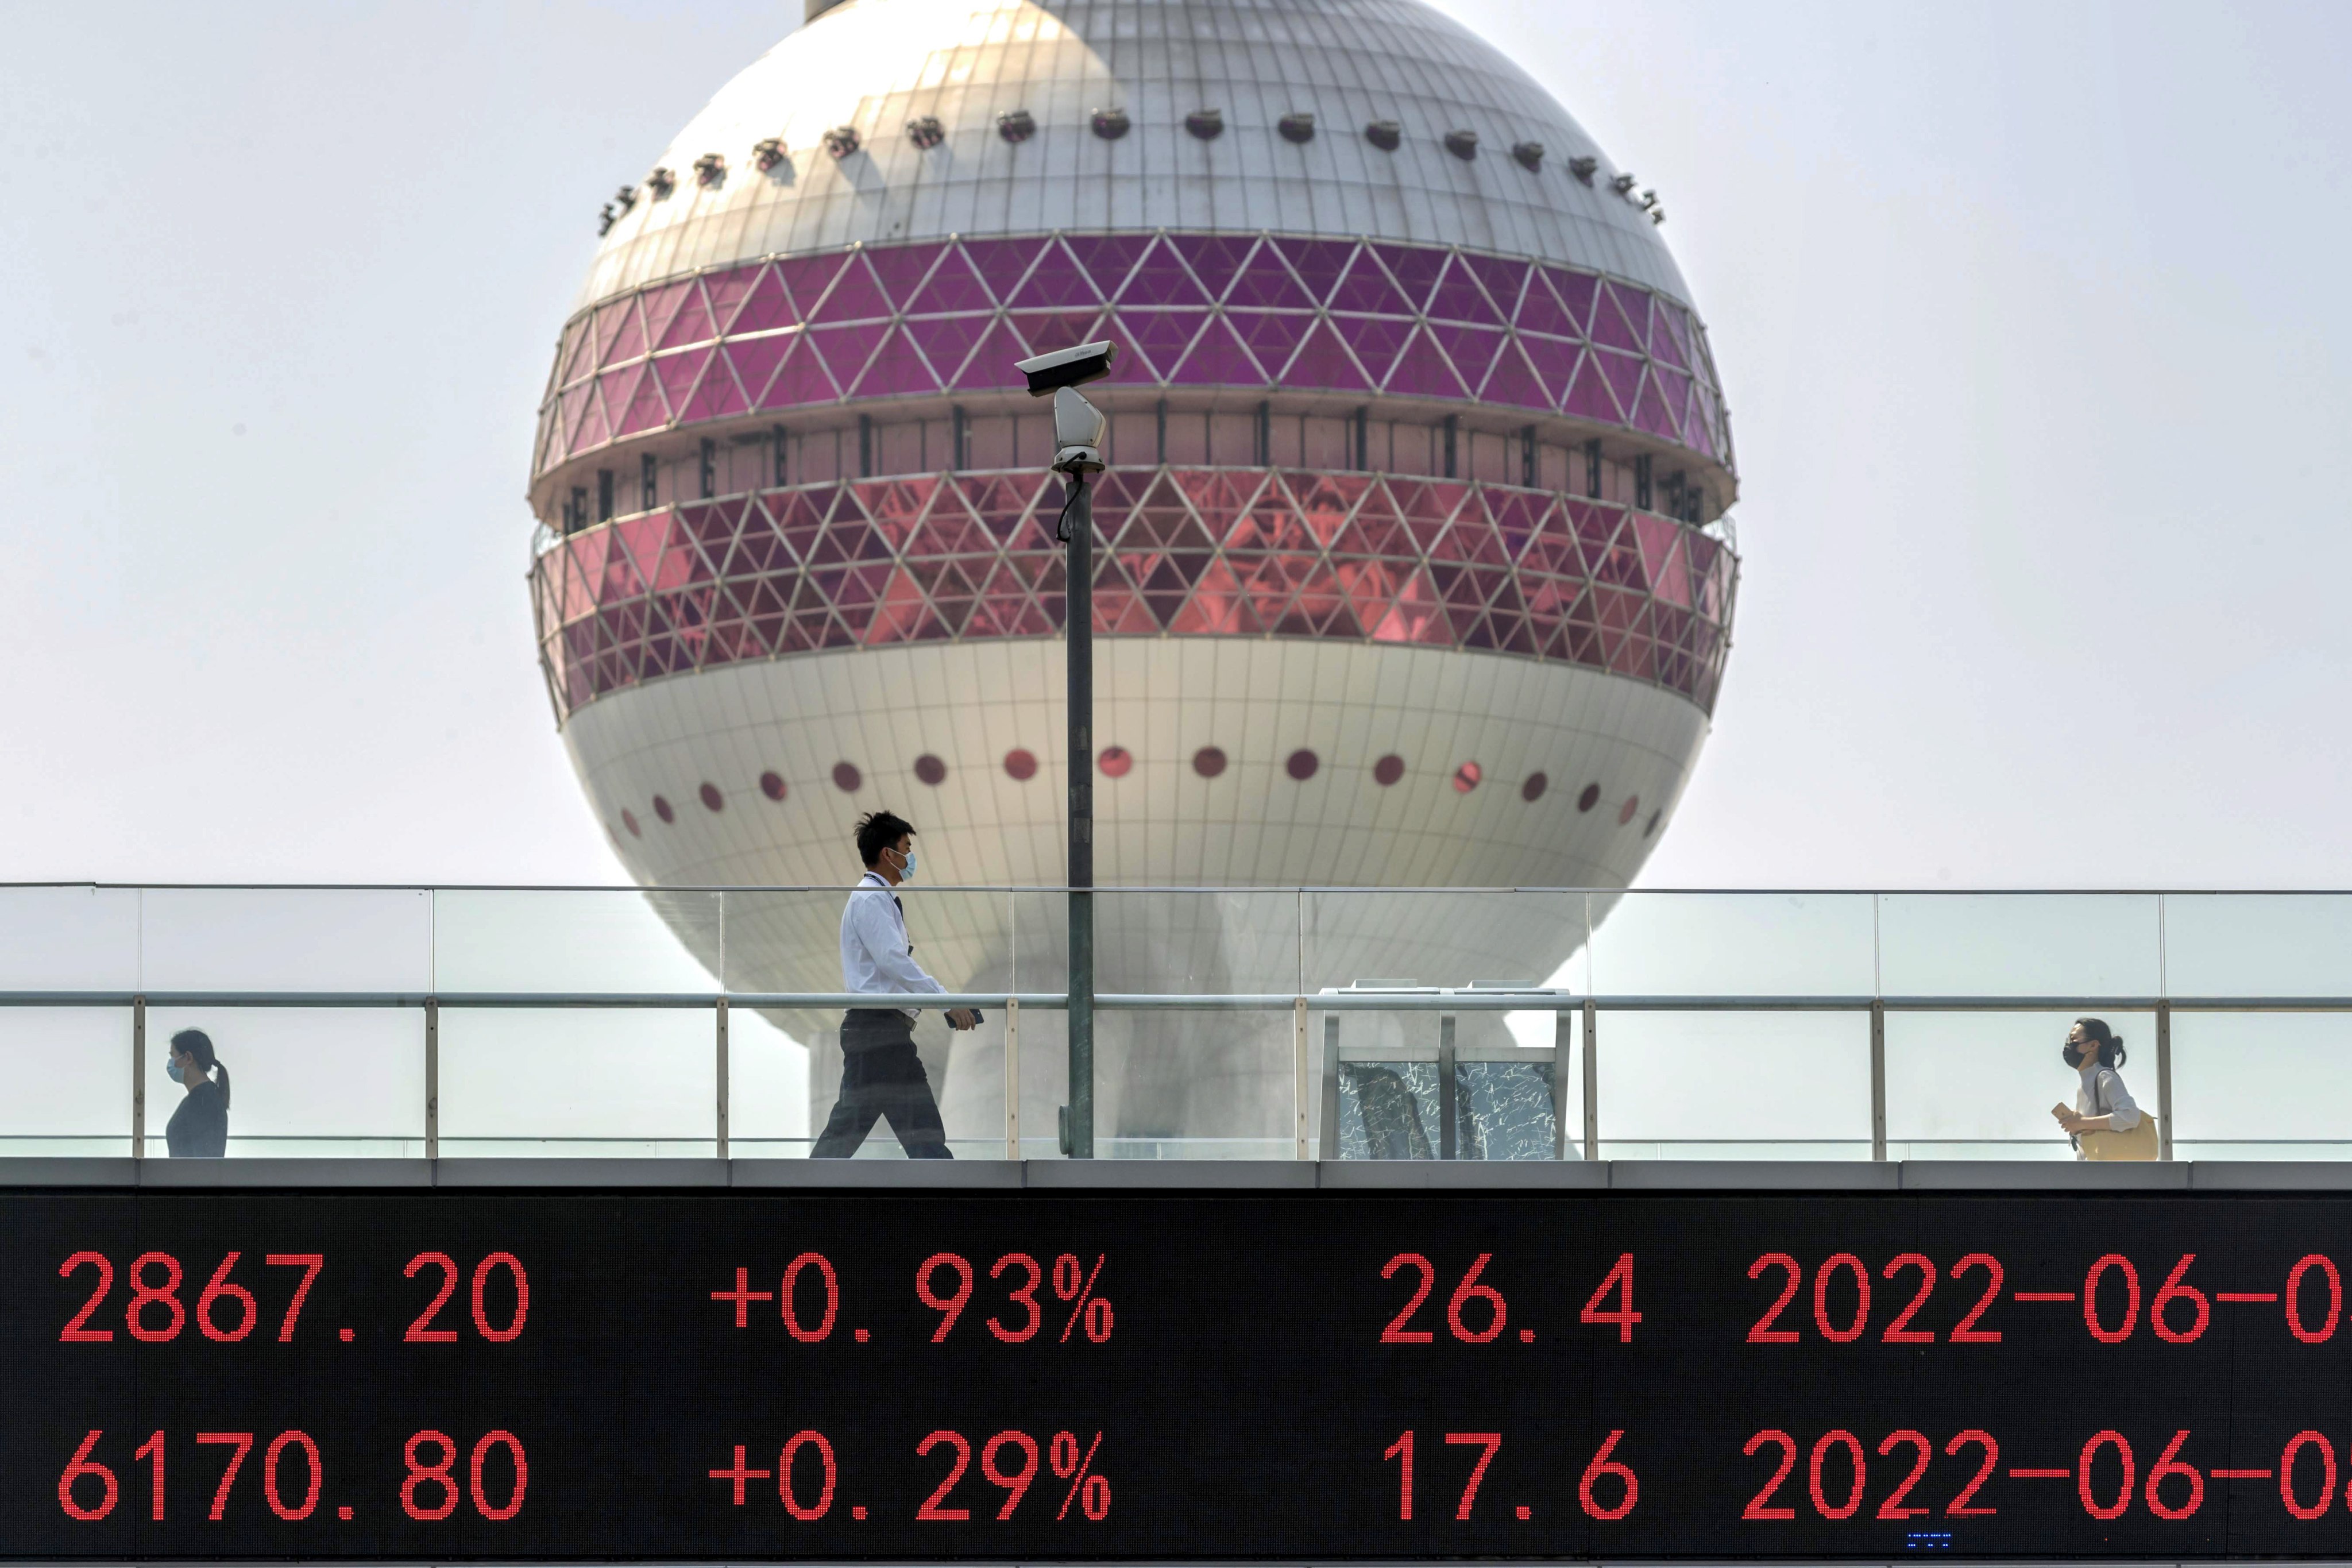 A pedestrian bridge that displayed the latest stock exchange data in Shanghai’s Lujiazui financial district on 8 June 2022. Photo: EPA-EFE